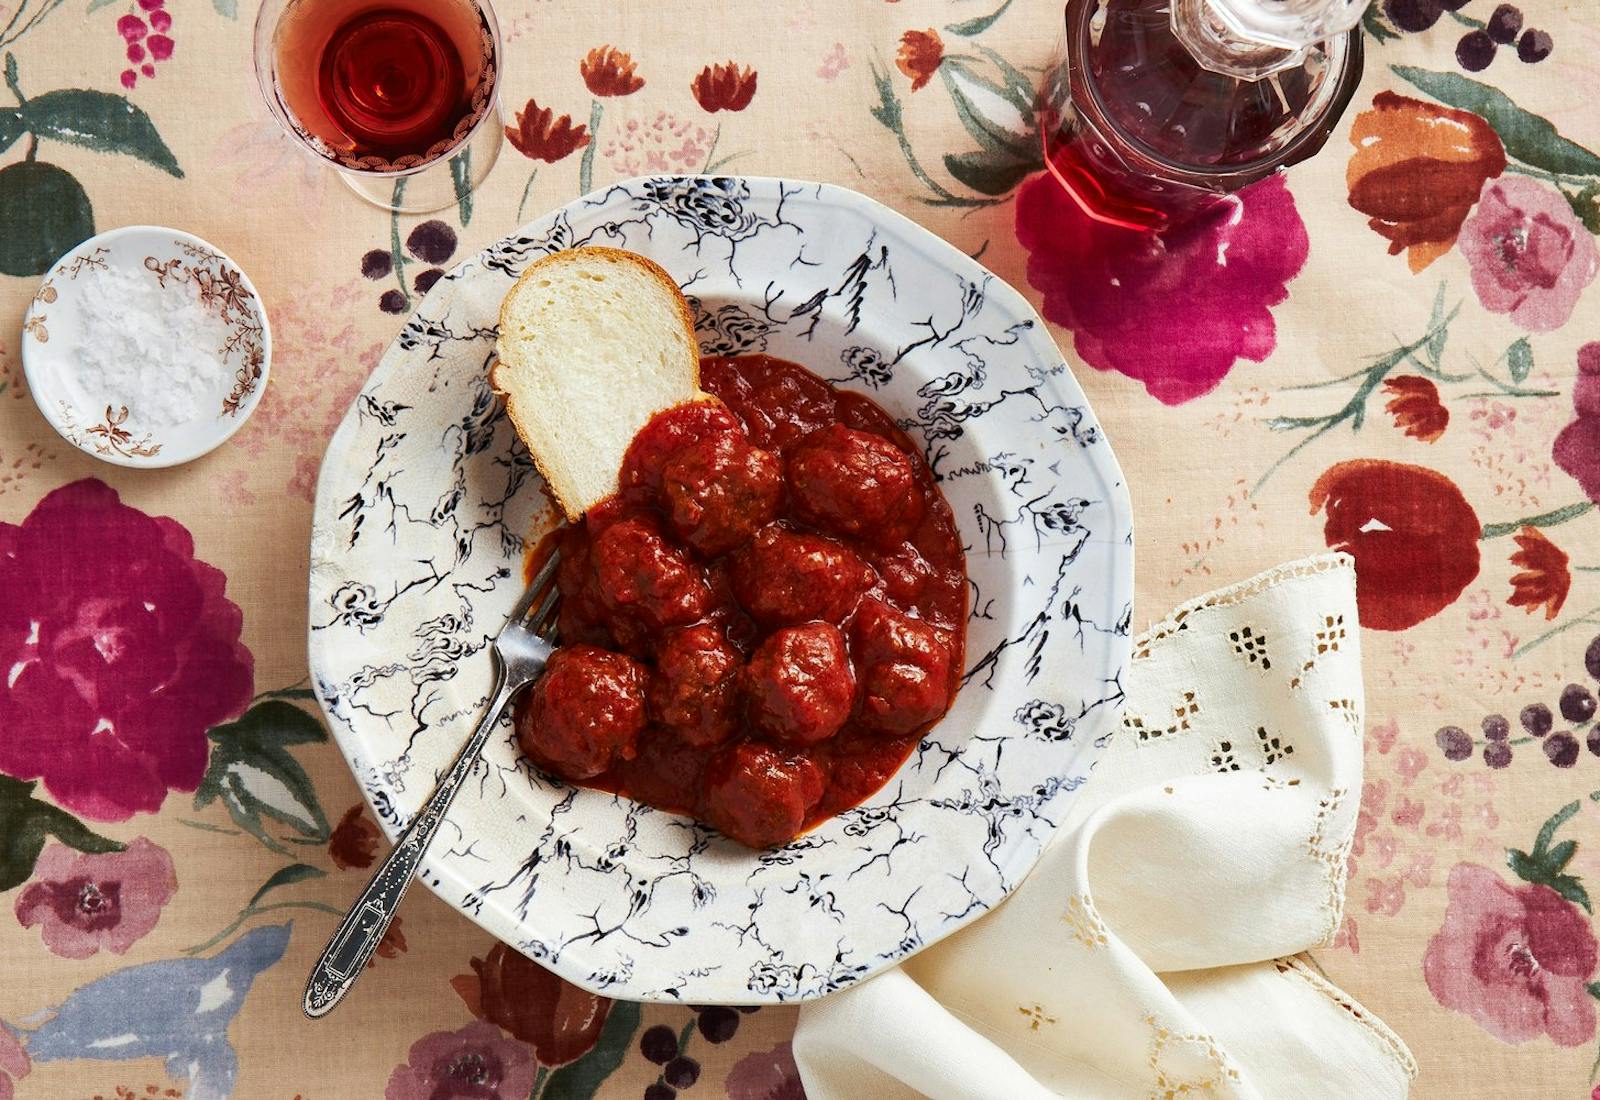 Meatballs and tomato sauce with challah and red wine atop a floral tablecloth.